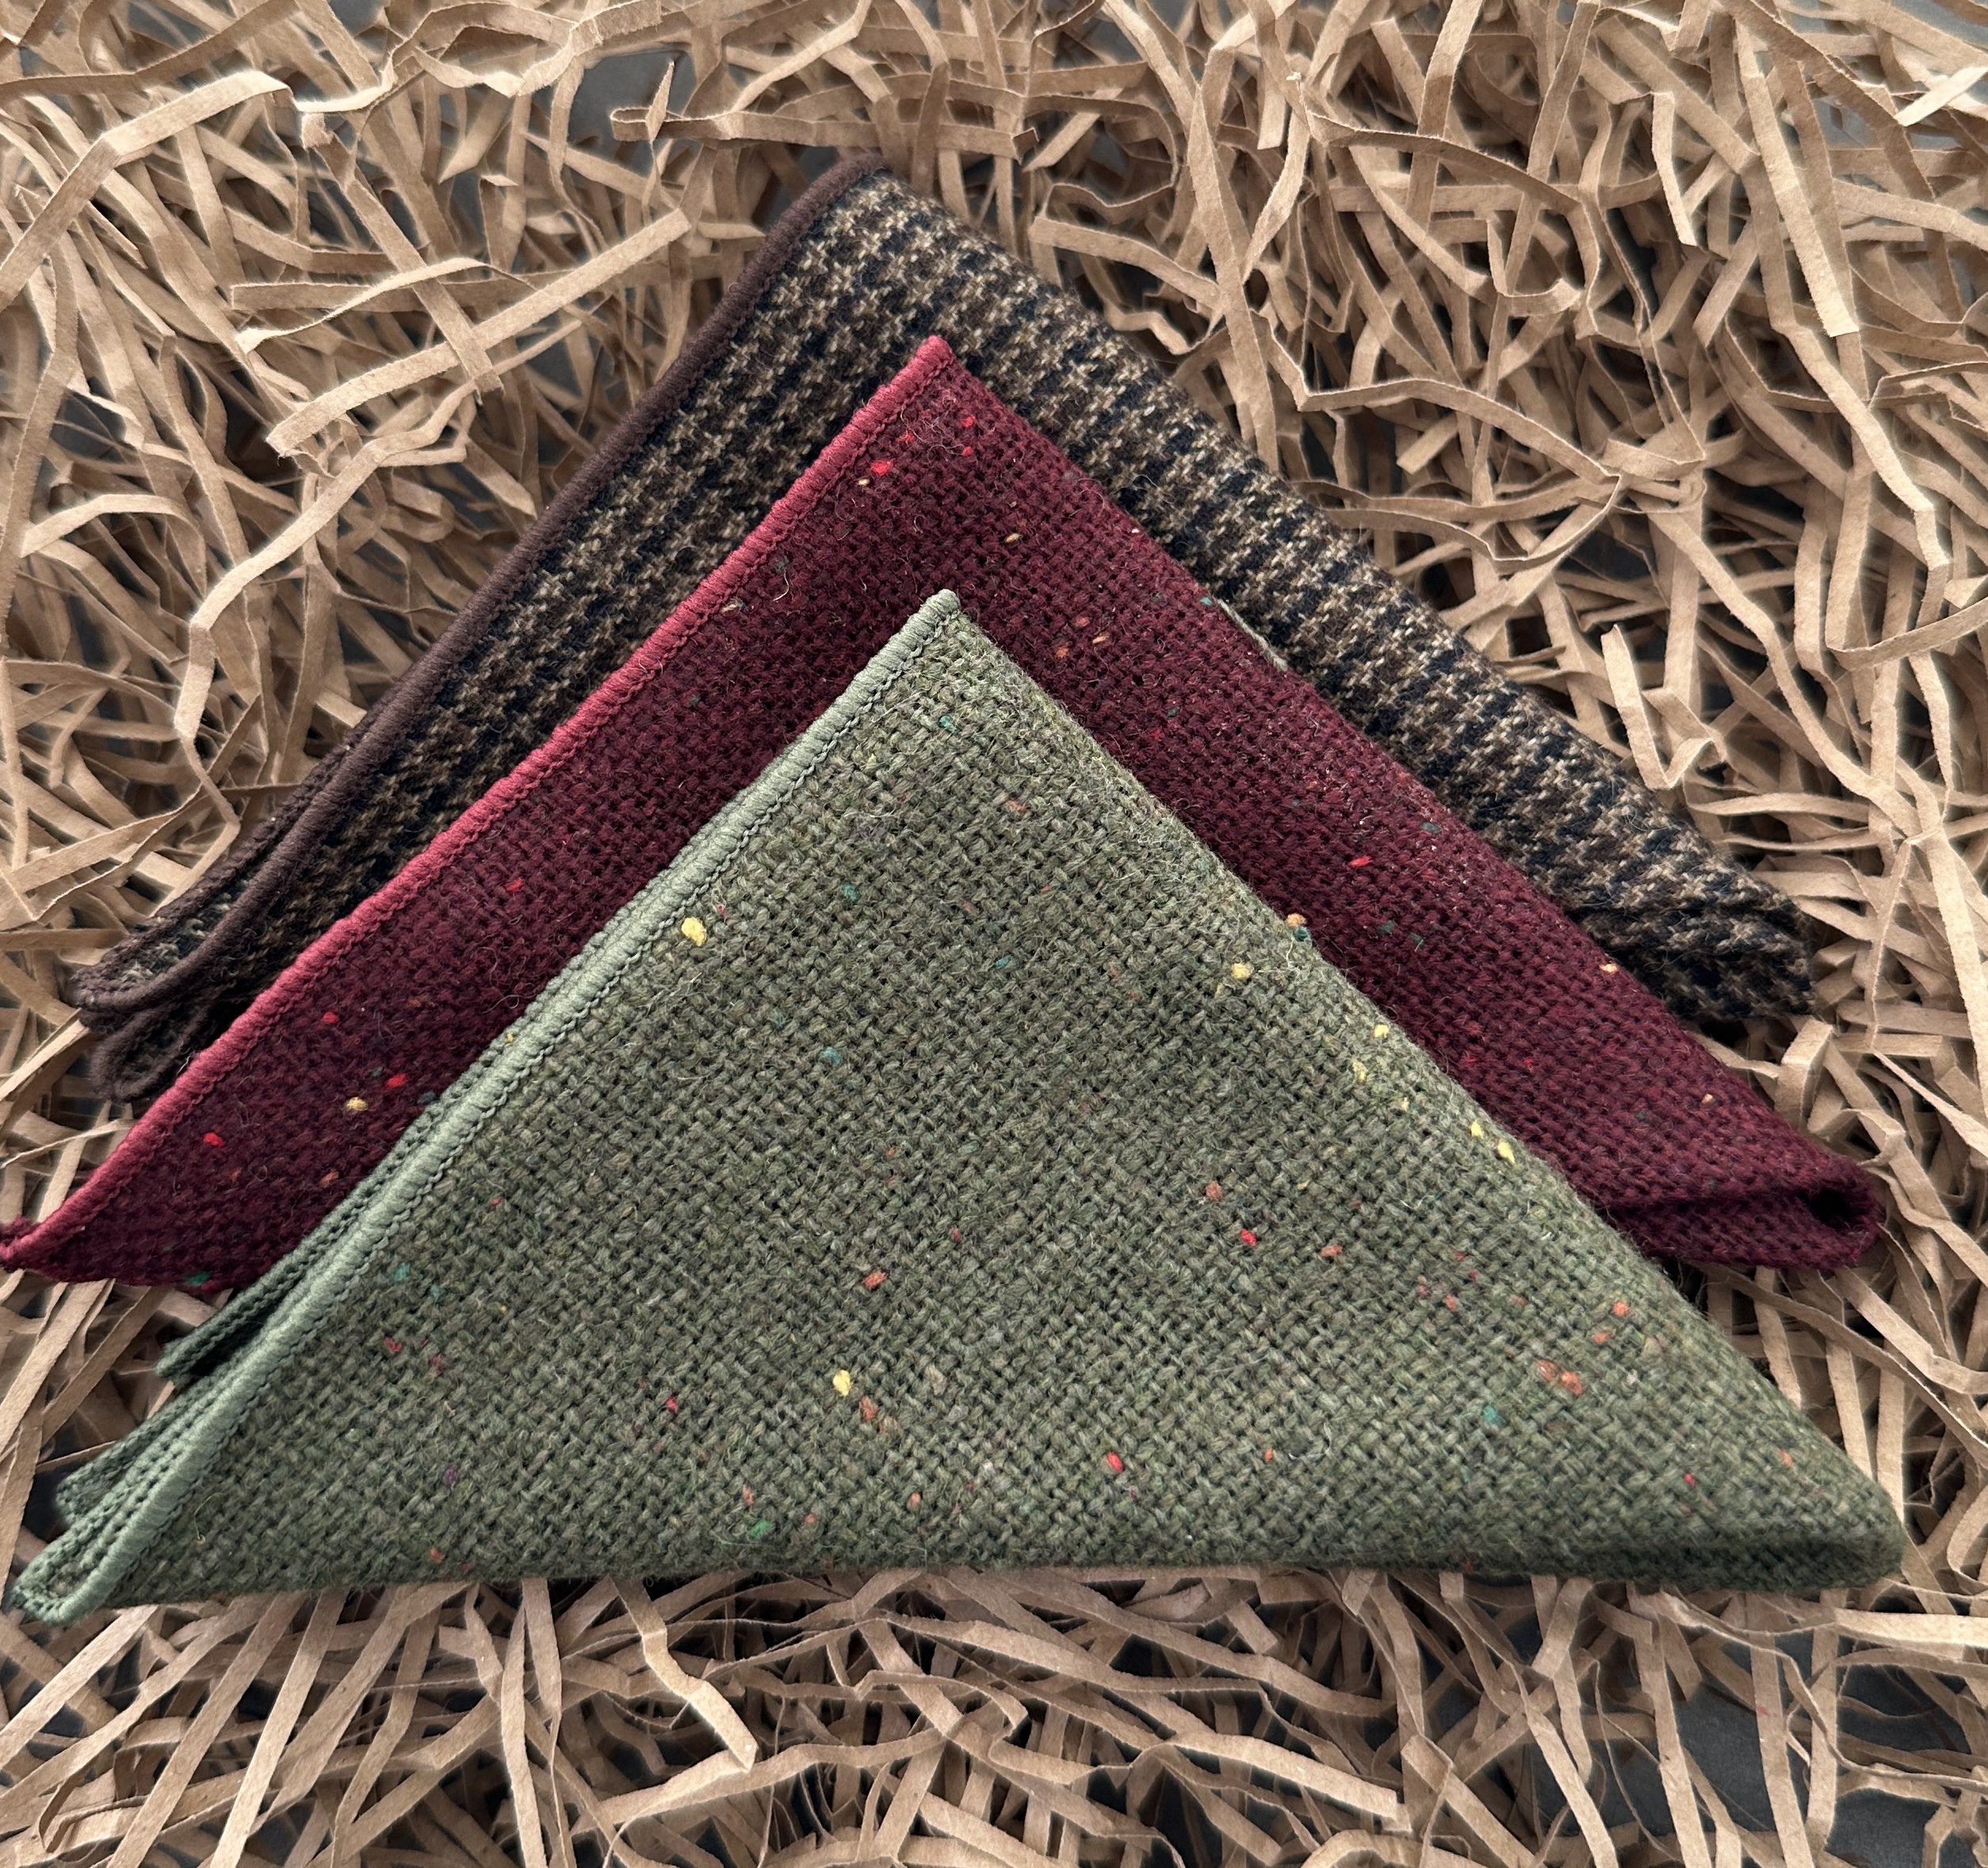 A set of mens wool pocket squares in wool for mens gifts UK, unusual mens gifts and groomsmen gifts UK.